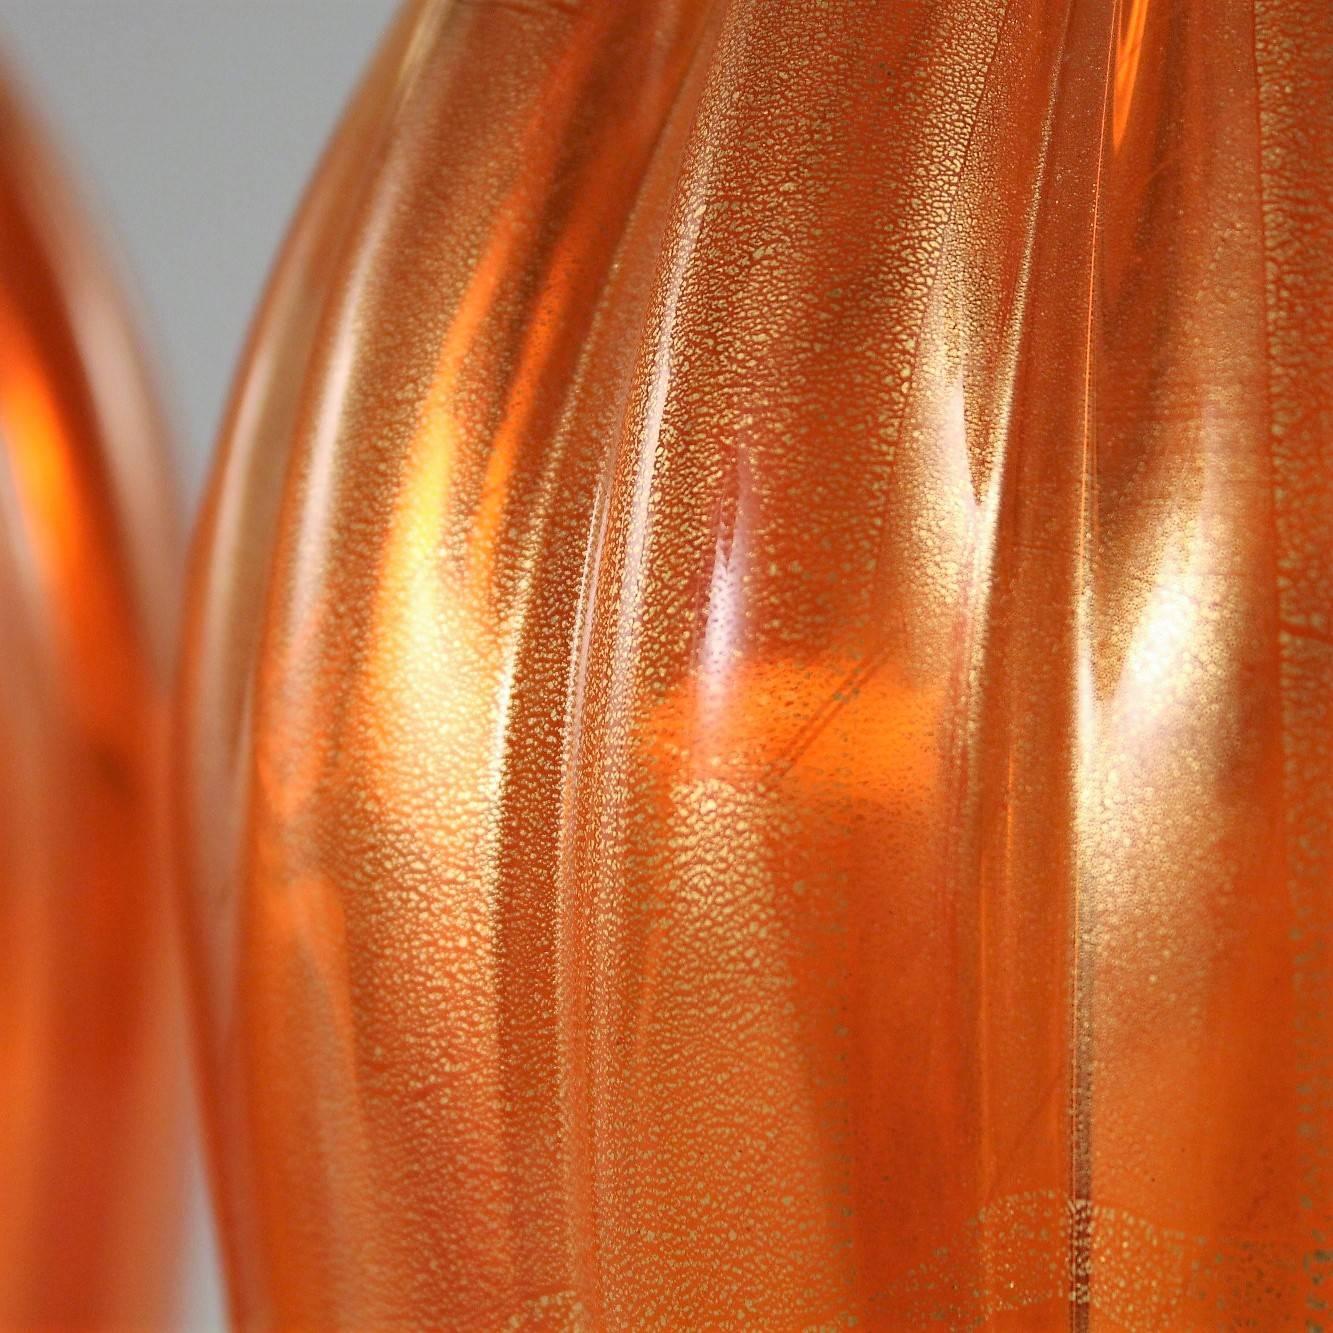 Late 20th Century Pair of Vintage Murano Blown Glass Table Lamps, Orange and Gold Leaf